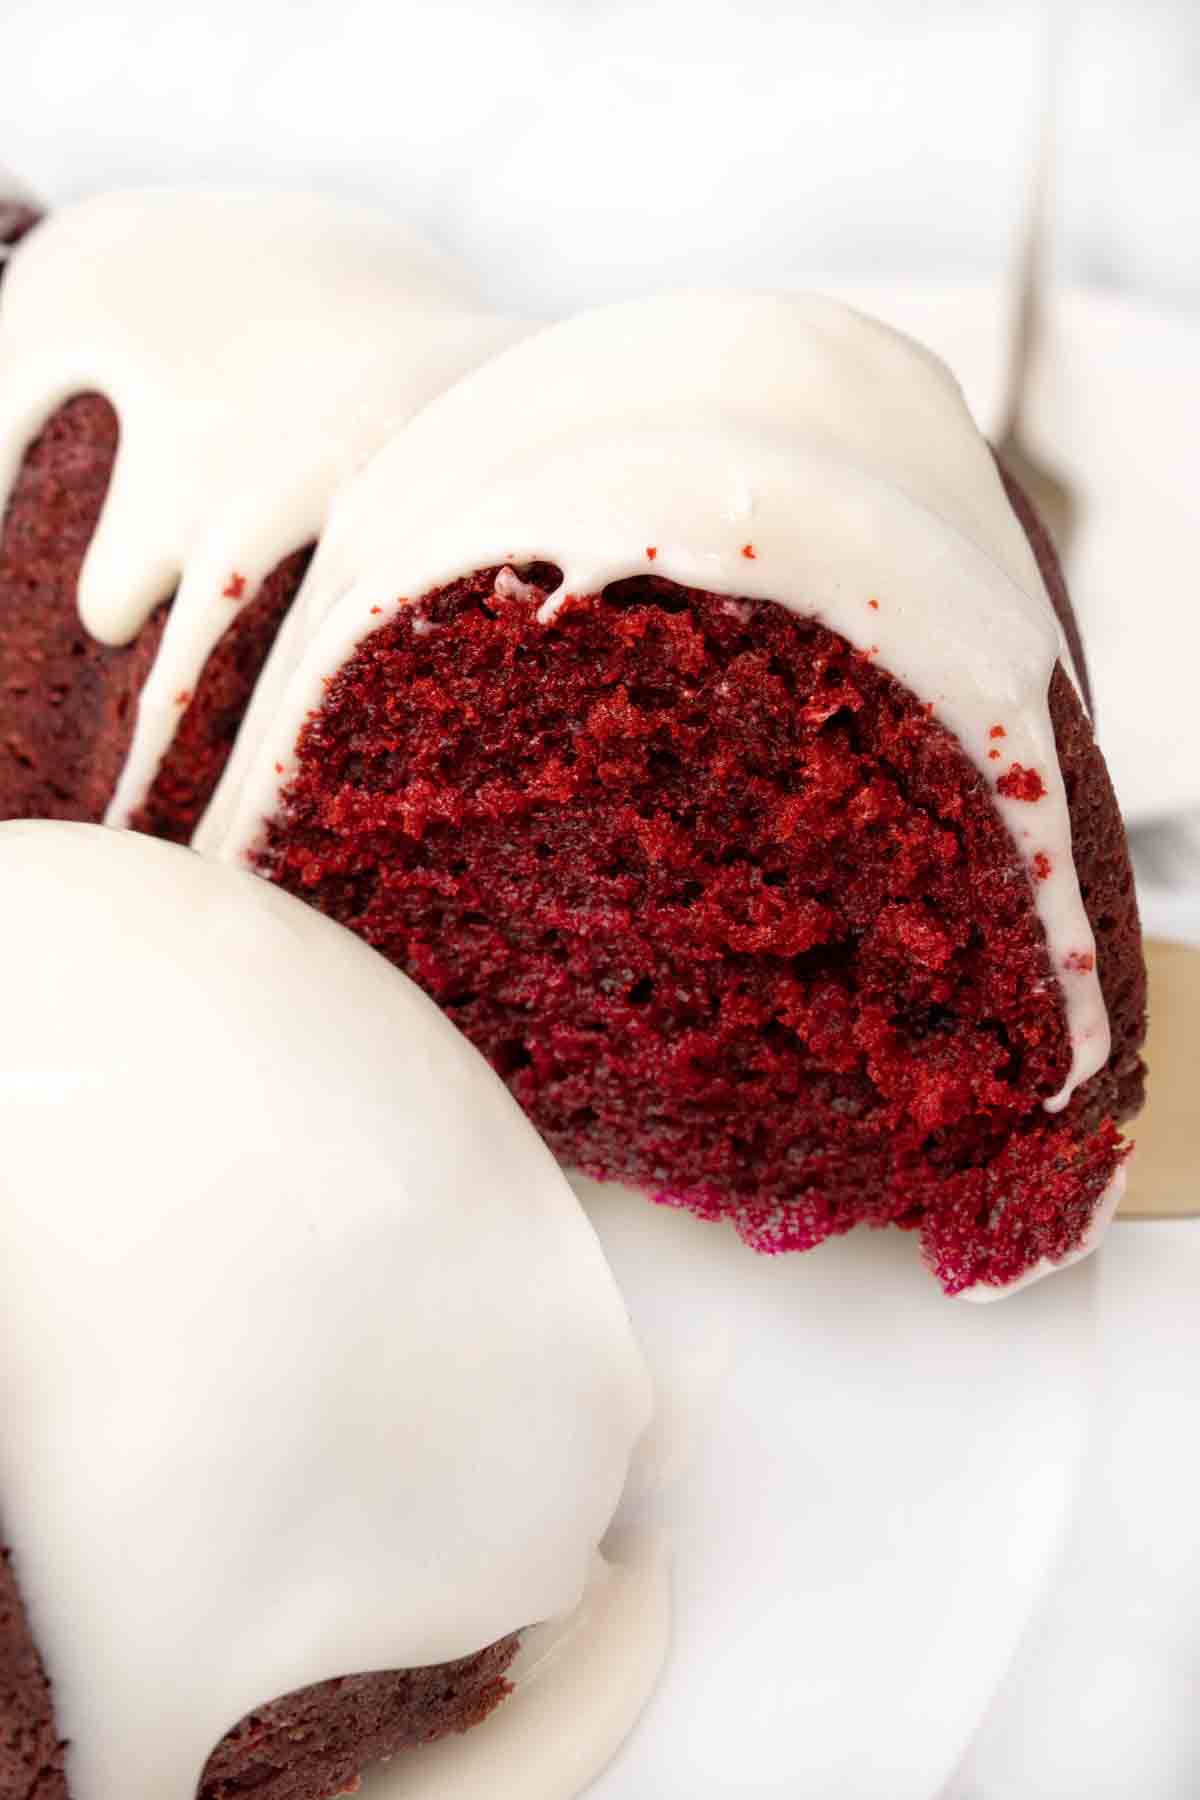 Slice of red velvet cake being taken out of whole cake.